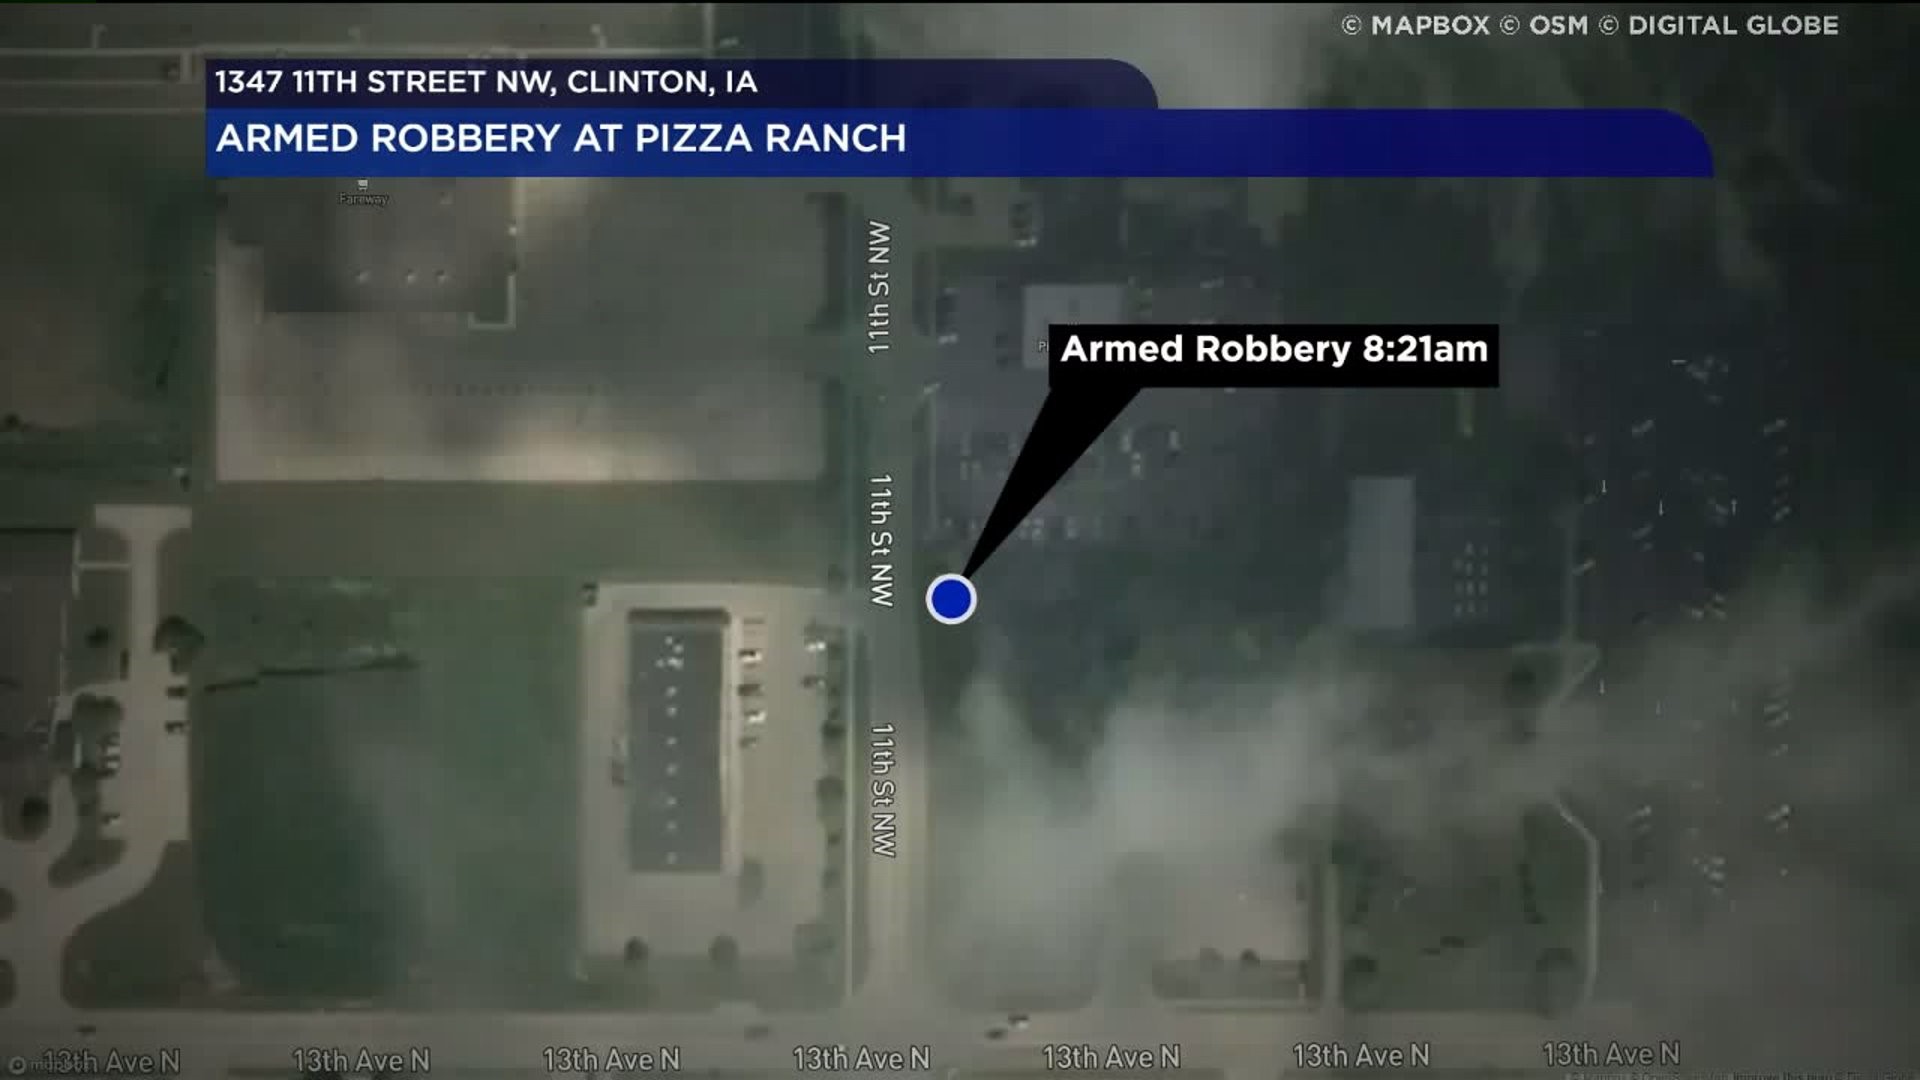 Clinton Armed Robbery Investigation